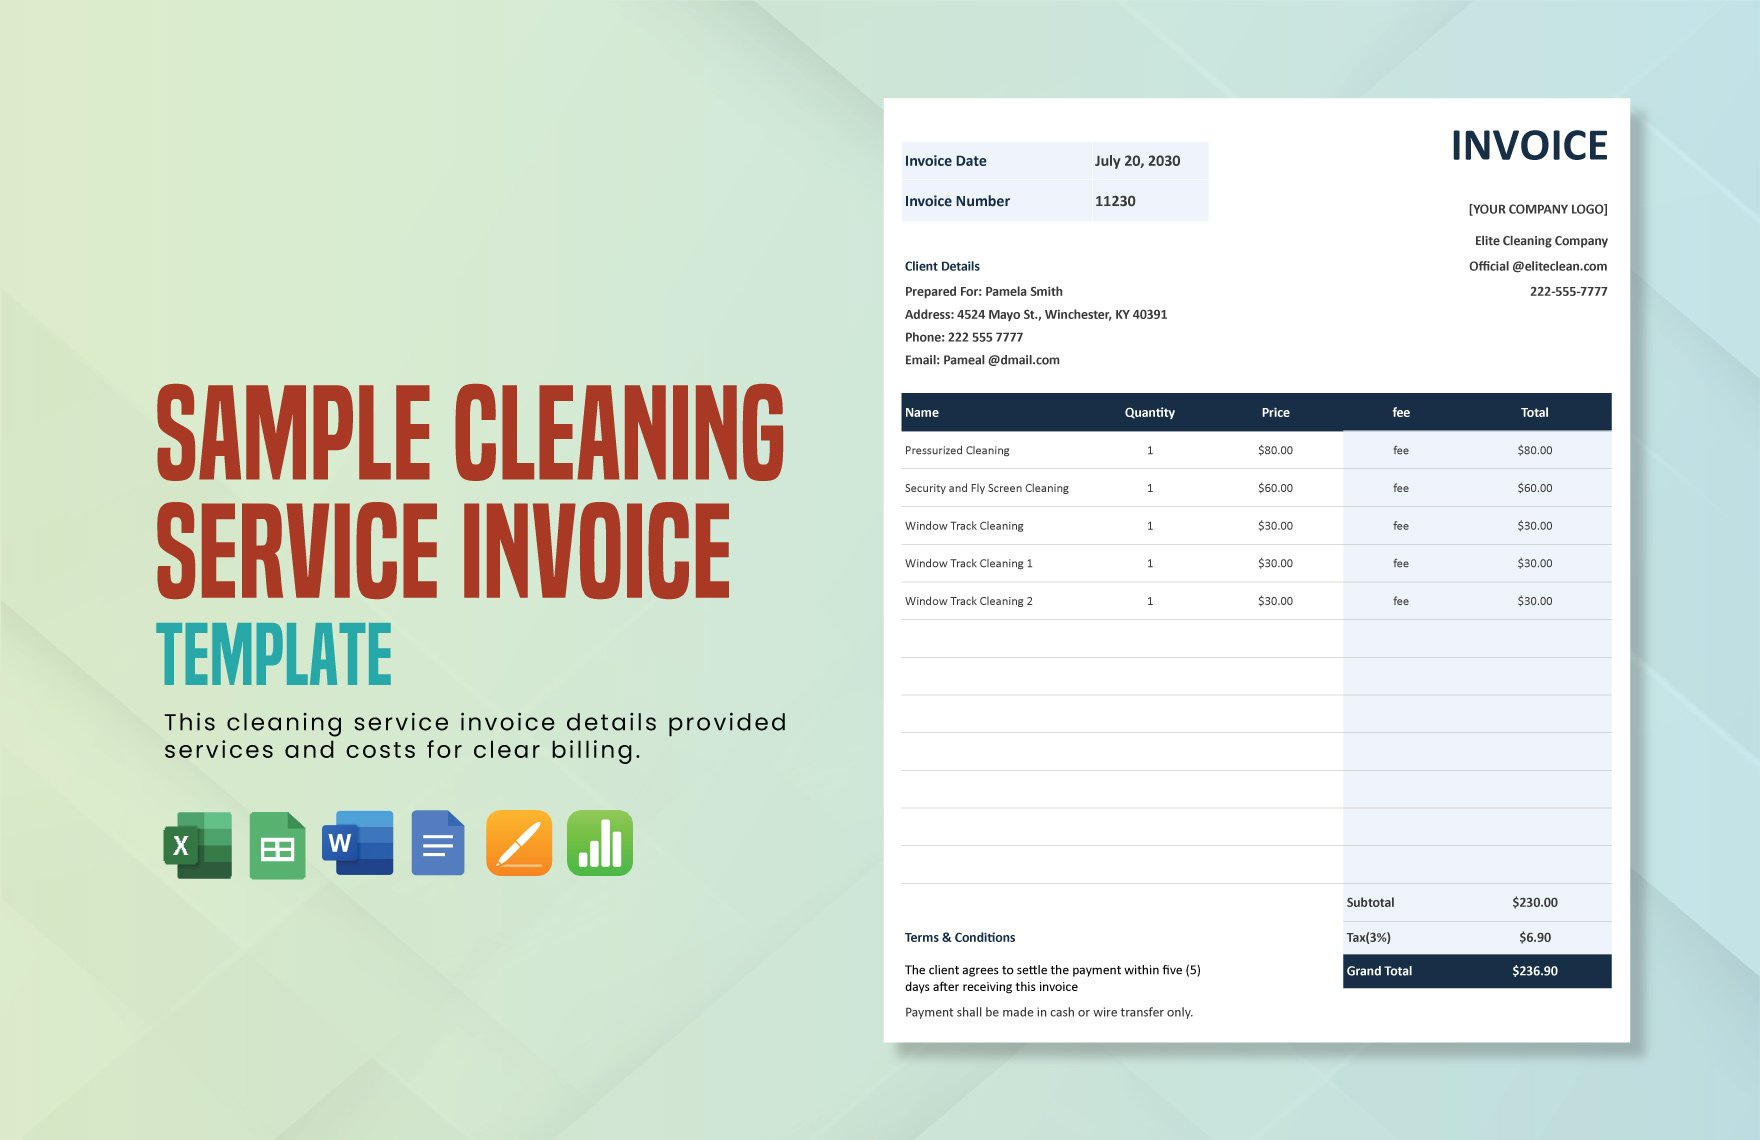 Sample Cleaning Service Invoice Template in Word, Google Docs, Excel, Google Sheets, Apple Pages, Apple Numbers